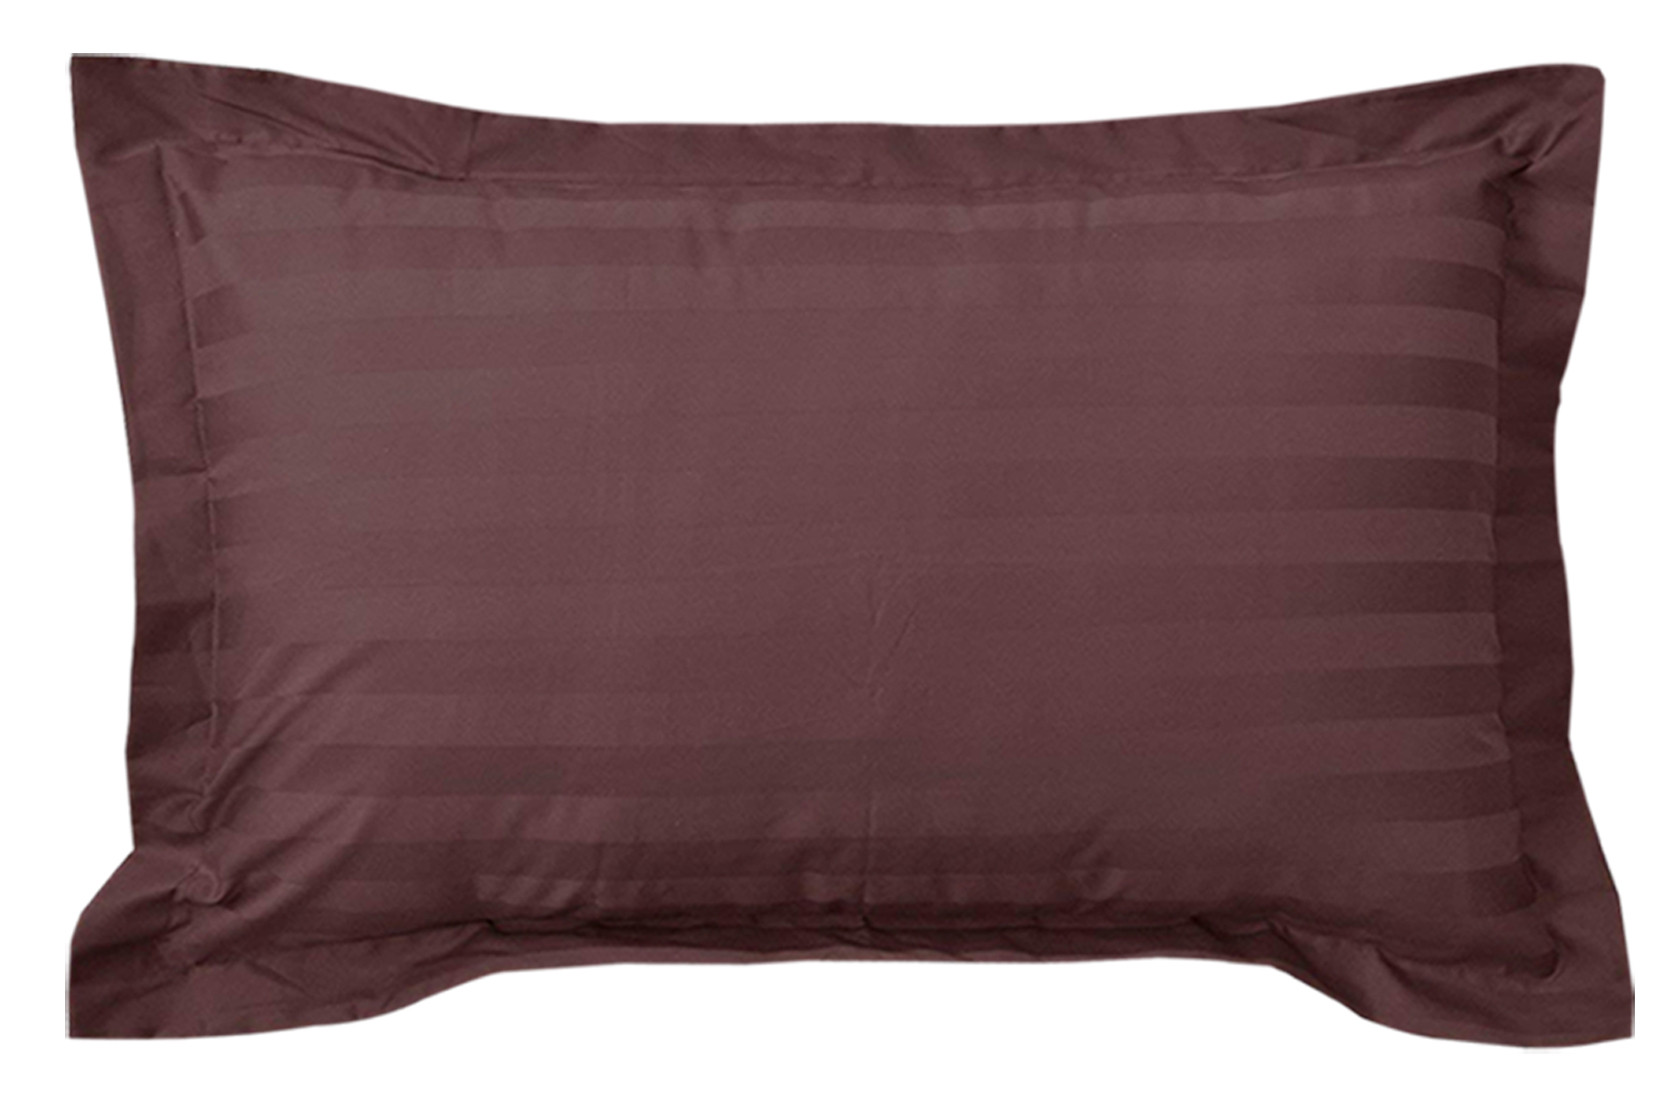 Kuber Industries Lining Design Breathable & Soft Cotton Pillow Cover/Protector/Case- 18x28 Inch,(Brown)-HS43KUBMART26749